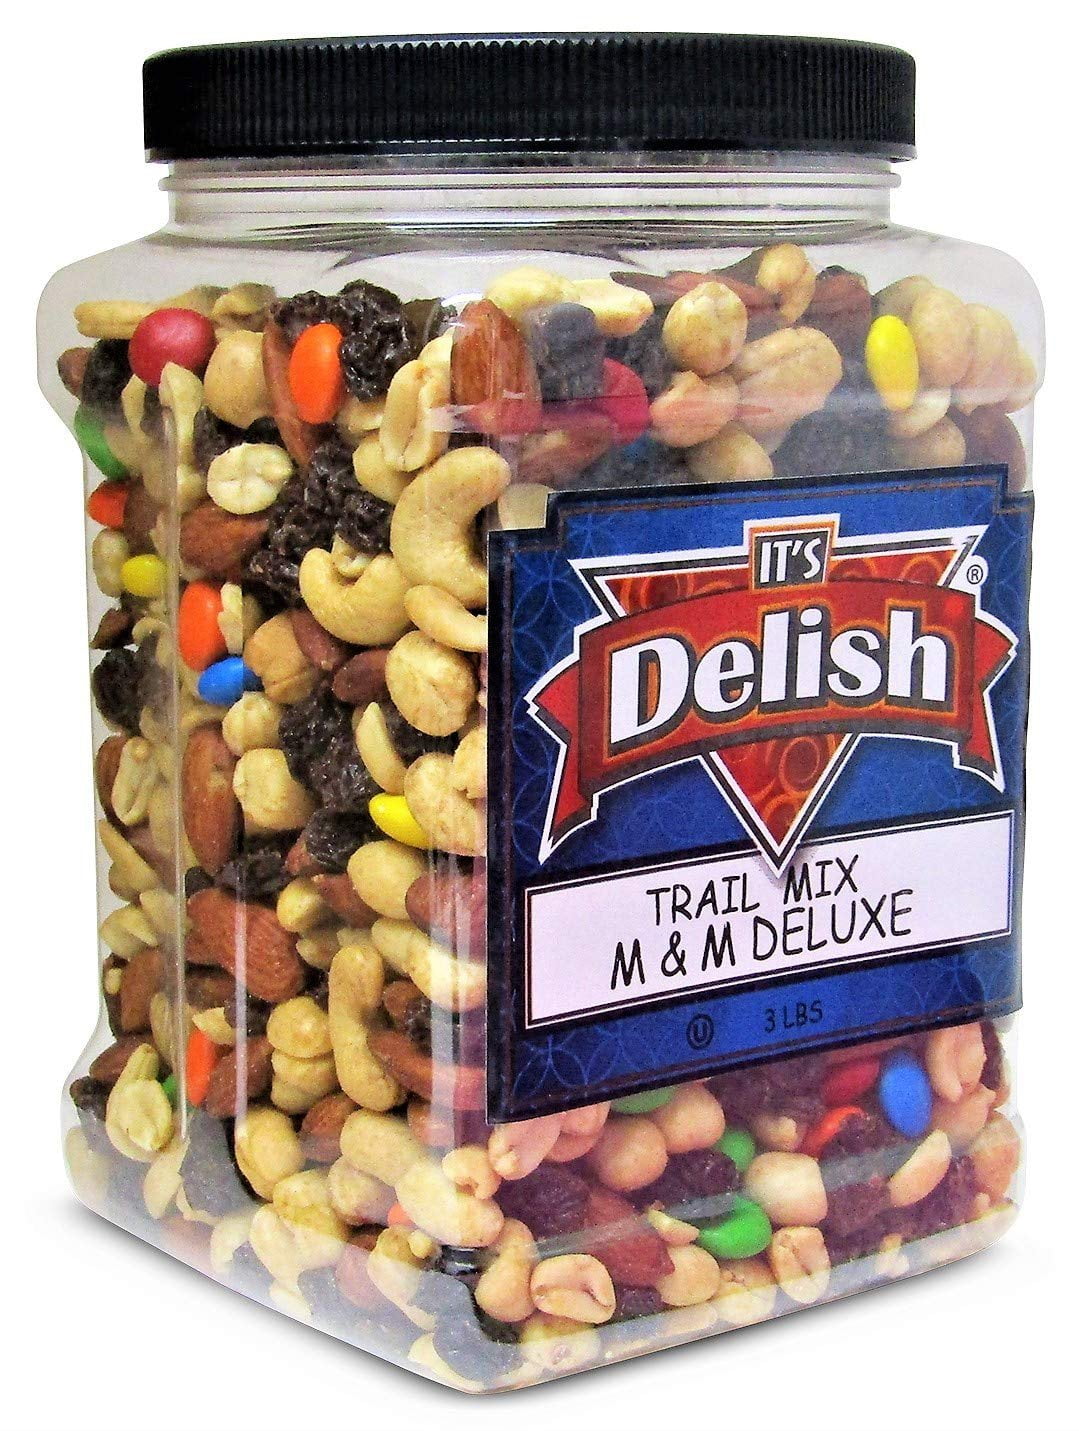 M&M's Classic Trail Mix by It's Delish, 3 lb Reusable Container Gourmet  Chocolate M and M Trail Mix with Dried Fruit and Nuts